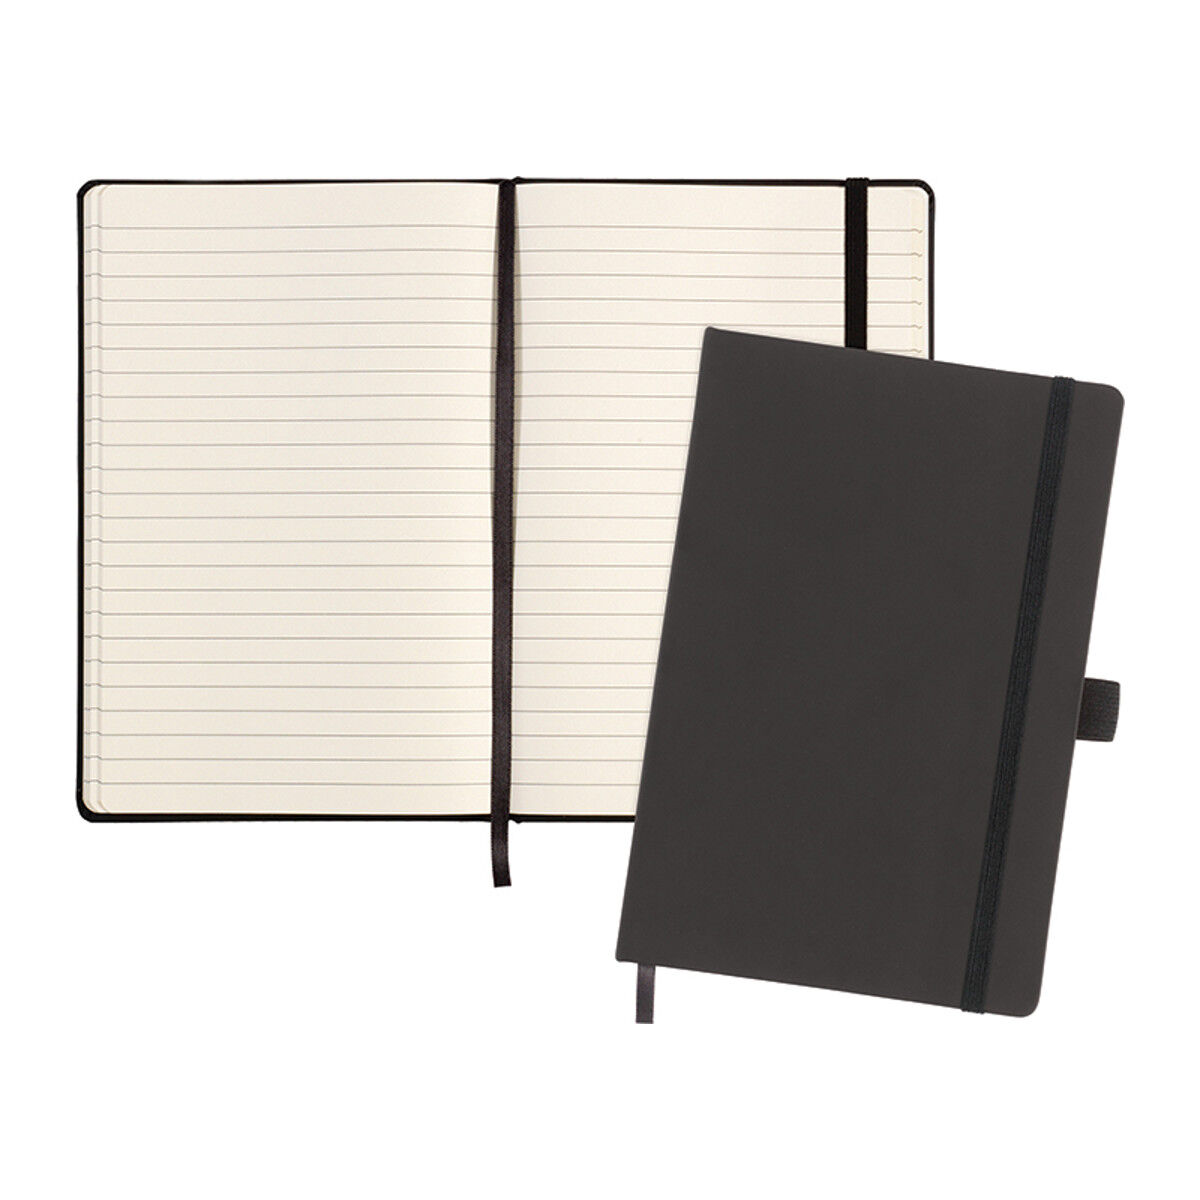 Recycled Car Windscreen A5 Notebook